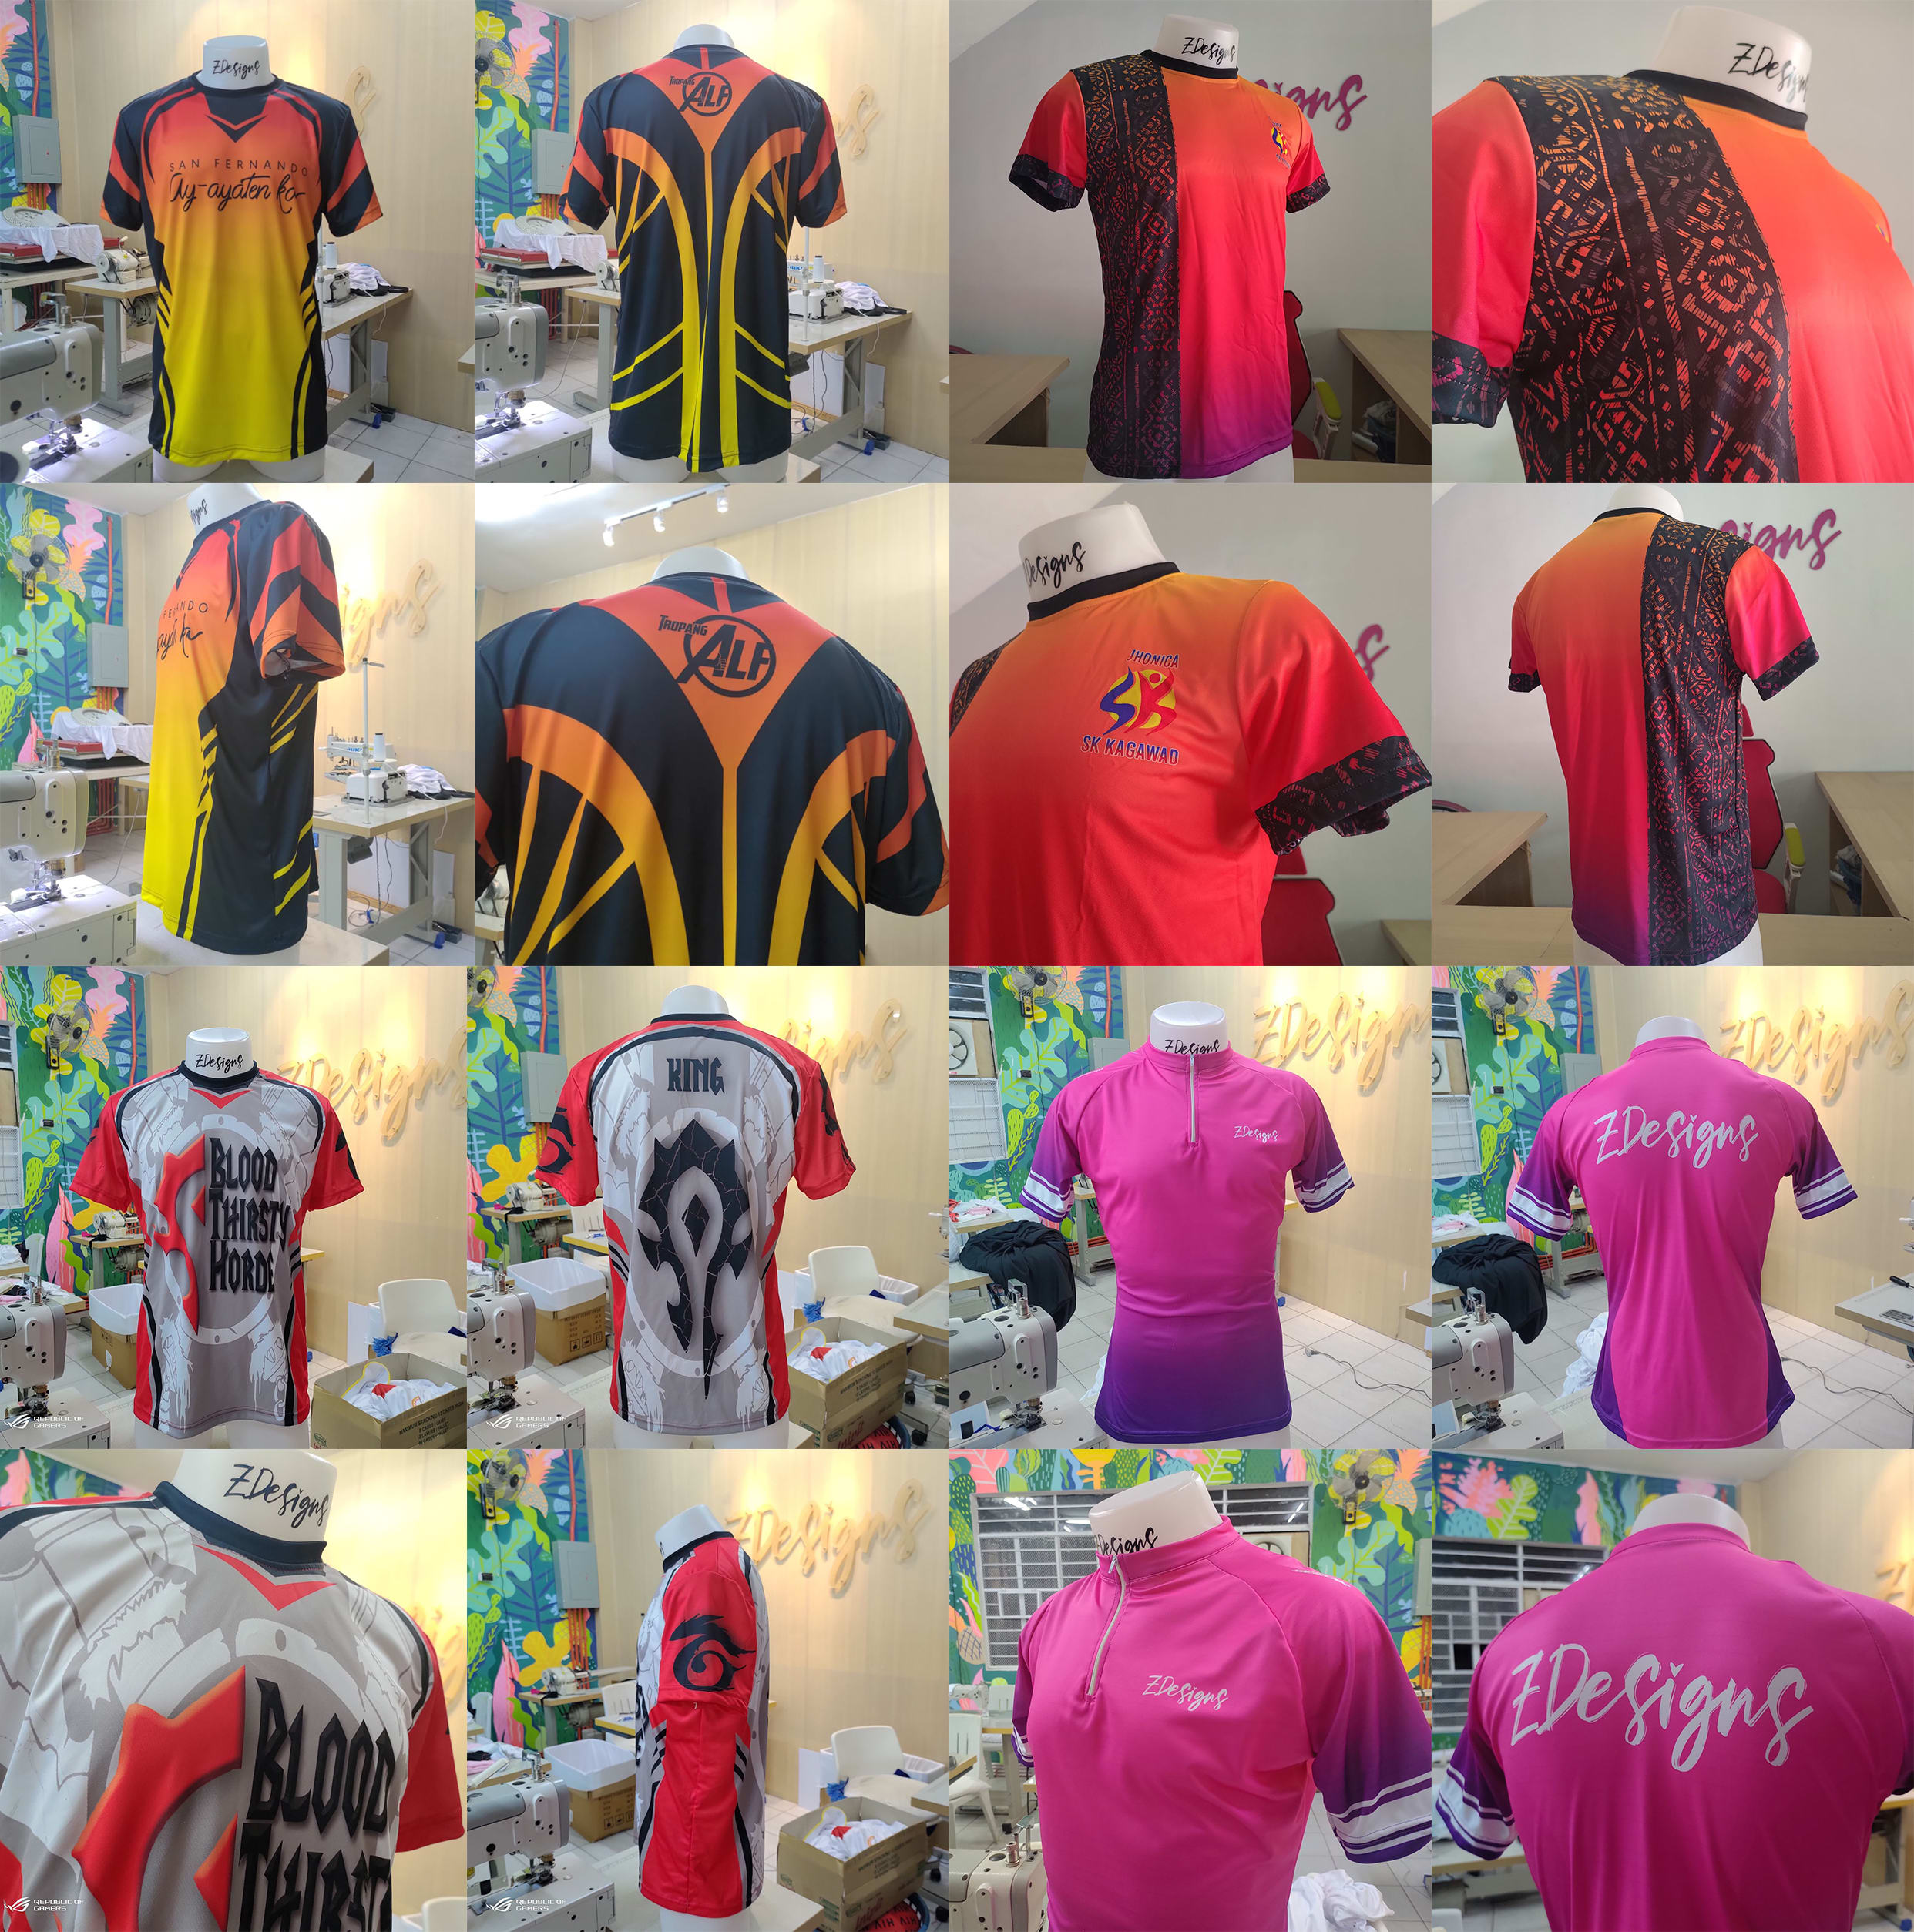 full bleed sublimation jersey